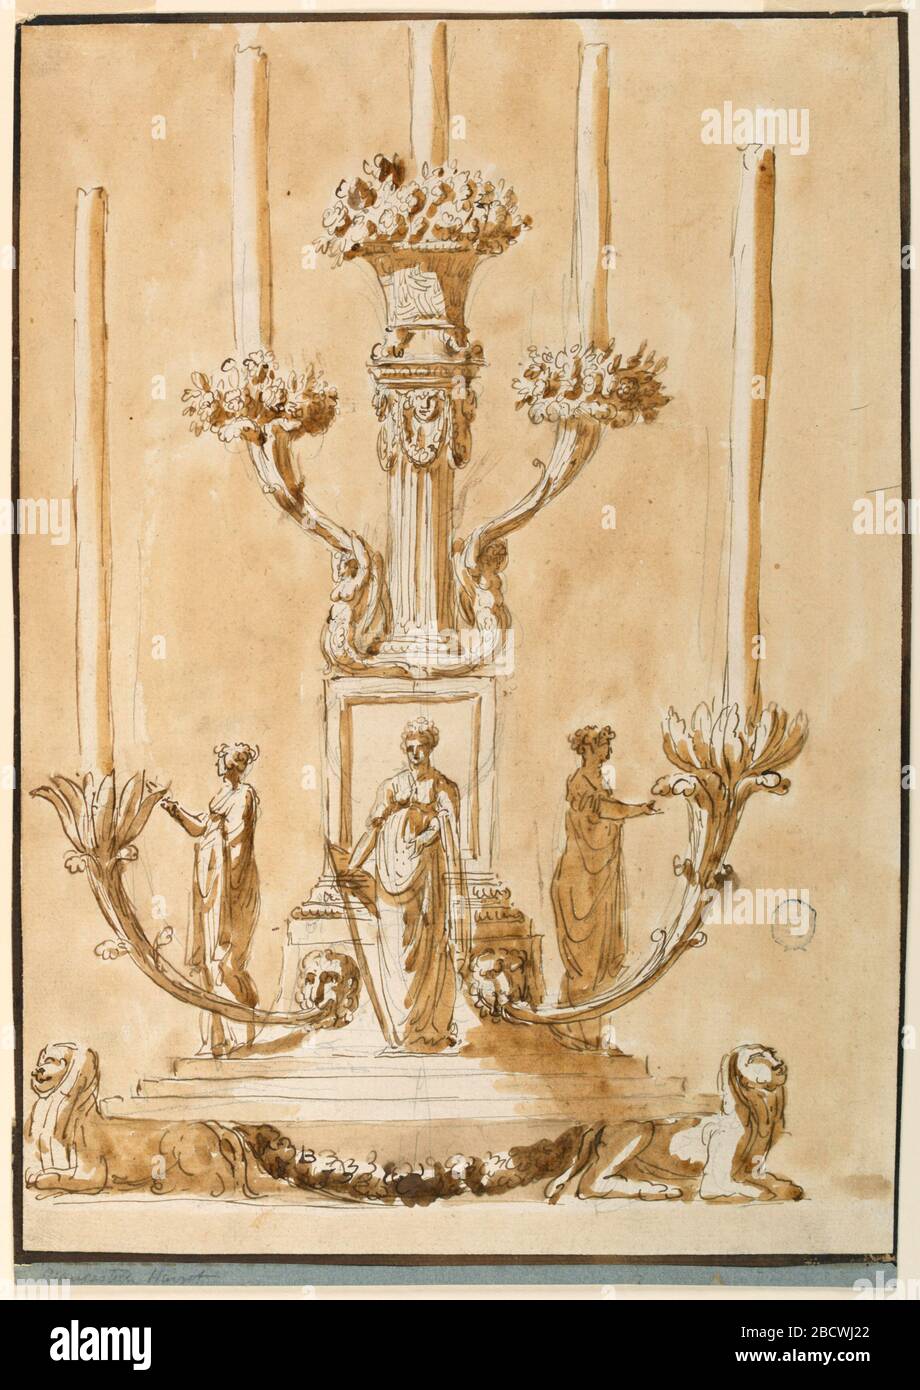 Candlestick. Research in ProgressA stepped plinth supported by lions. Above this, three women in classical dress. At top, a column supports a flower basket. Four candelabra arms terminating in flowers branch out, two on each side. A fifth candle emerges from top. Candlestick Stock Photo